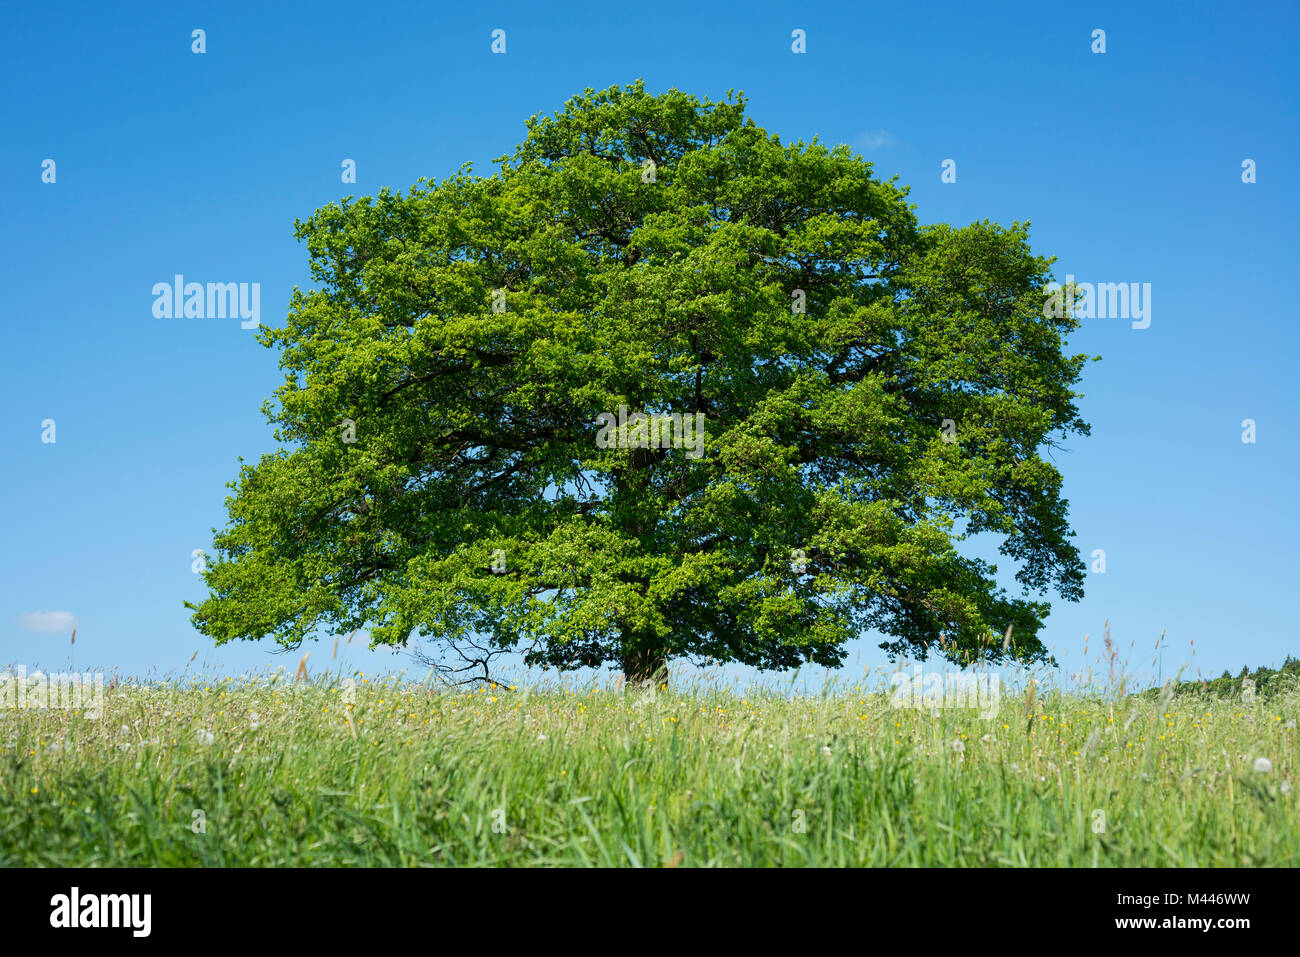 Old English oak (Quercus robur) in blooming meadow,solitary tree,Thuringia,Germany Stock Photo